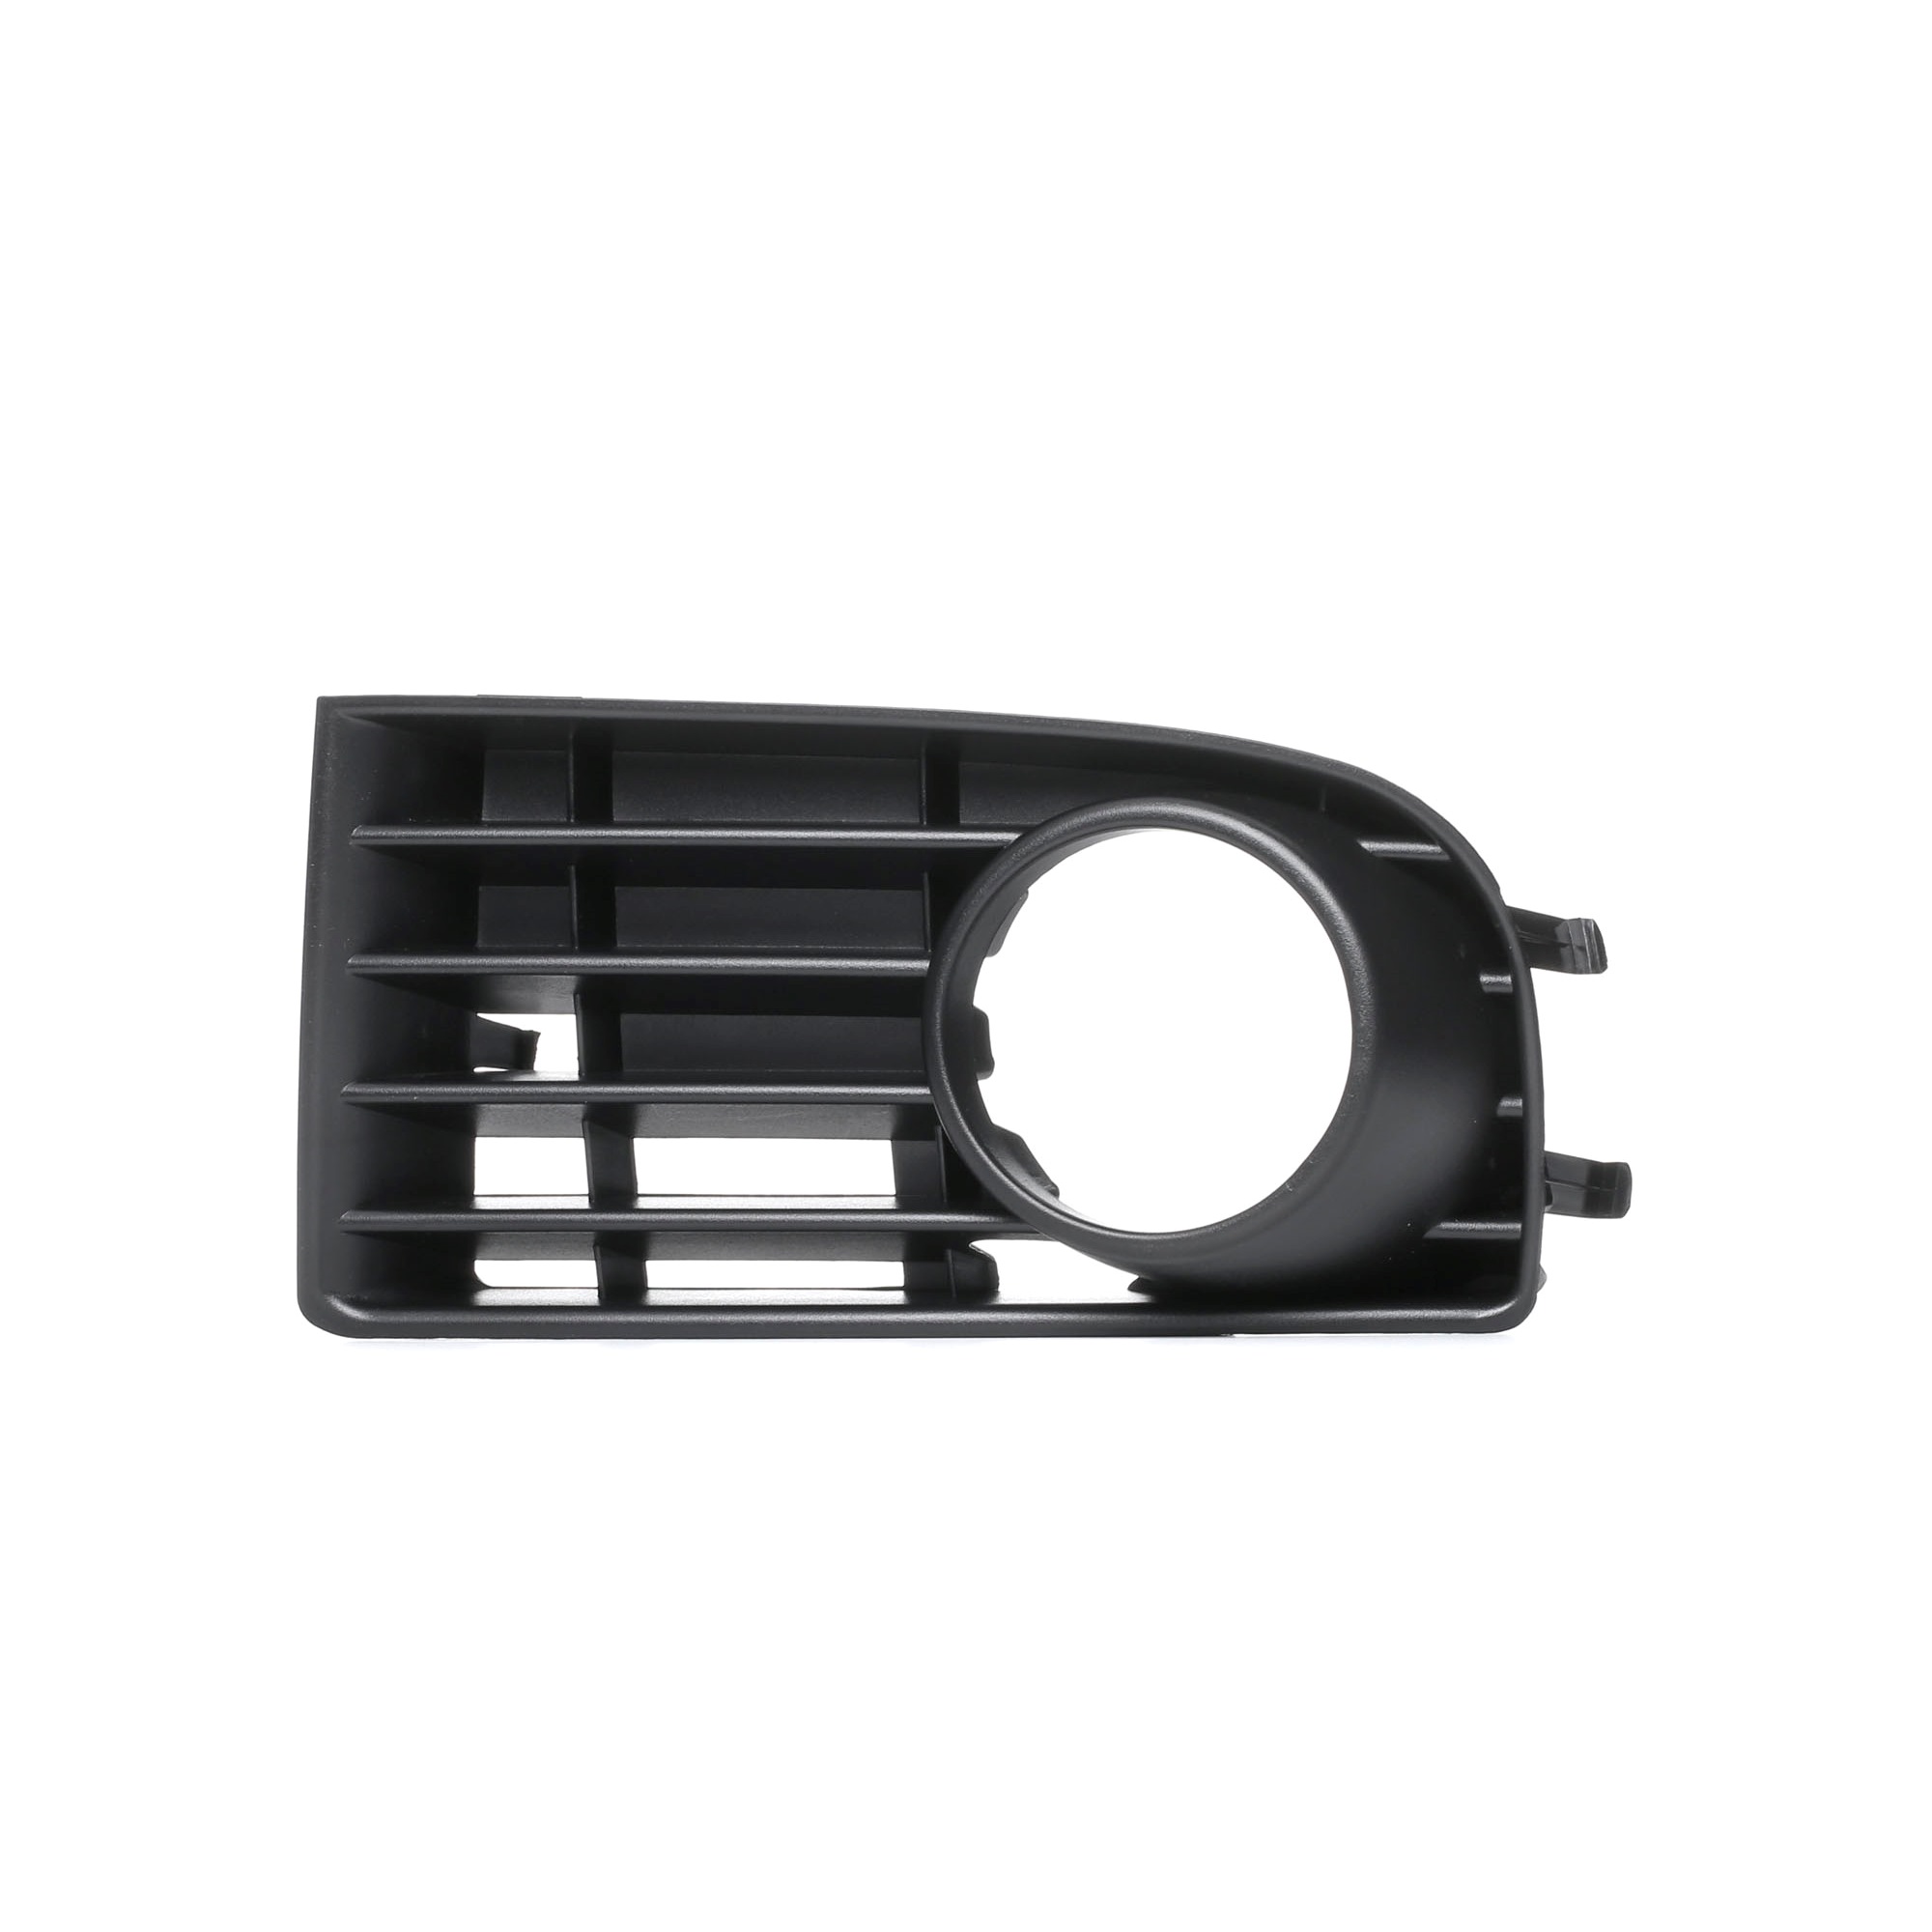 BLIC 6502-07-9524995P Bumper grill with hole(s) for fog lights, Fitting Position: Left Front